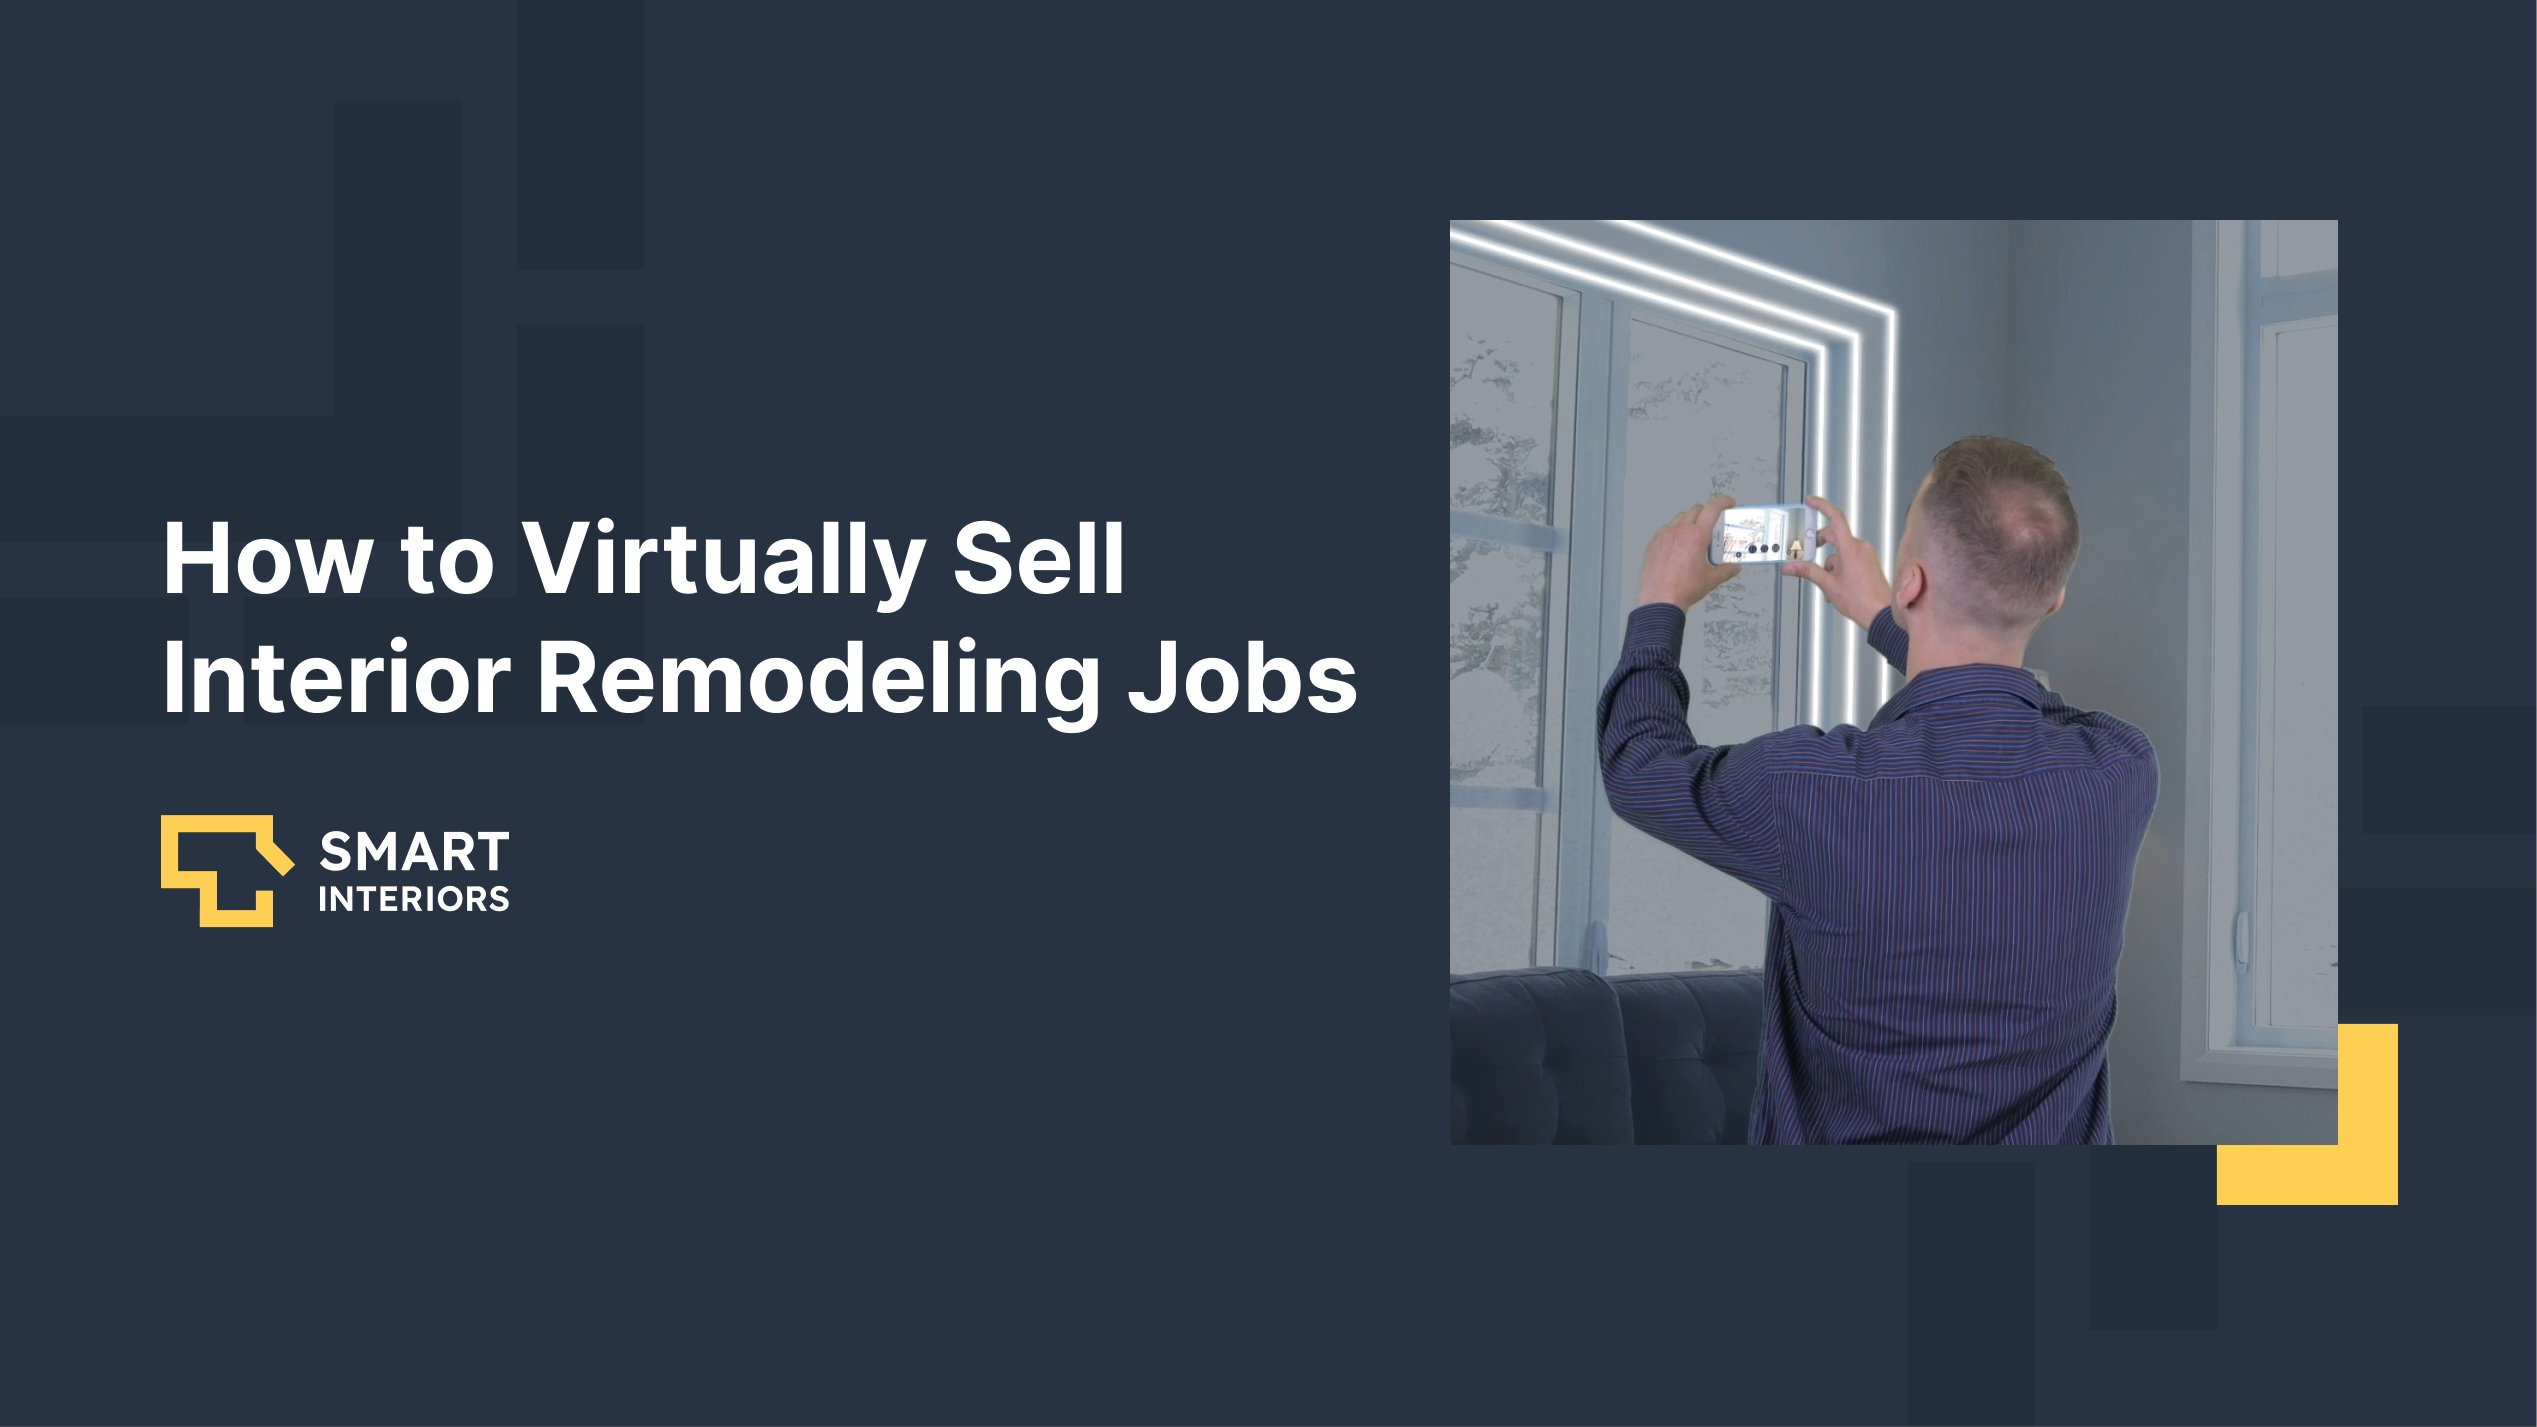 selling remodeling services virtually